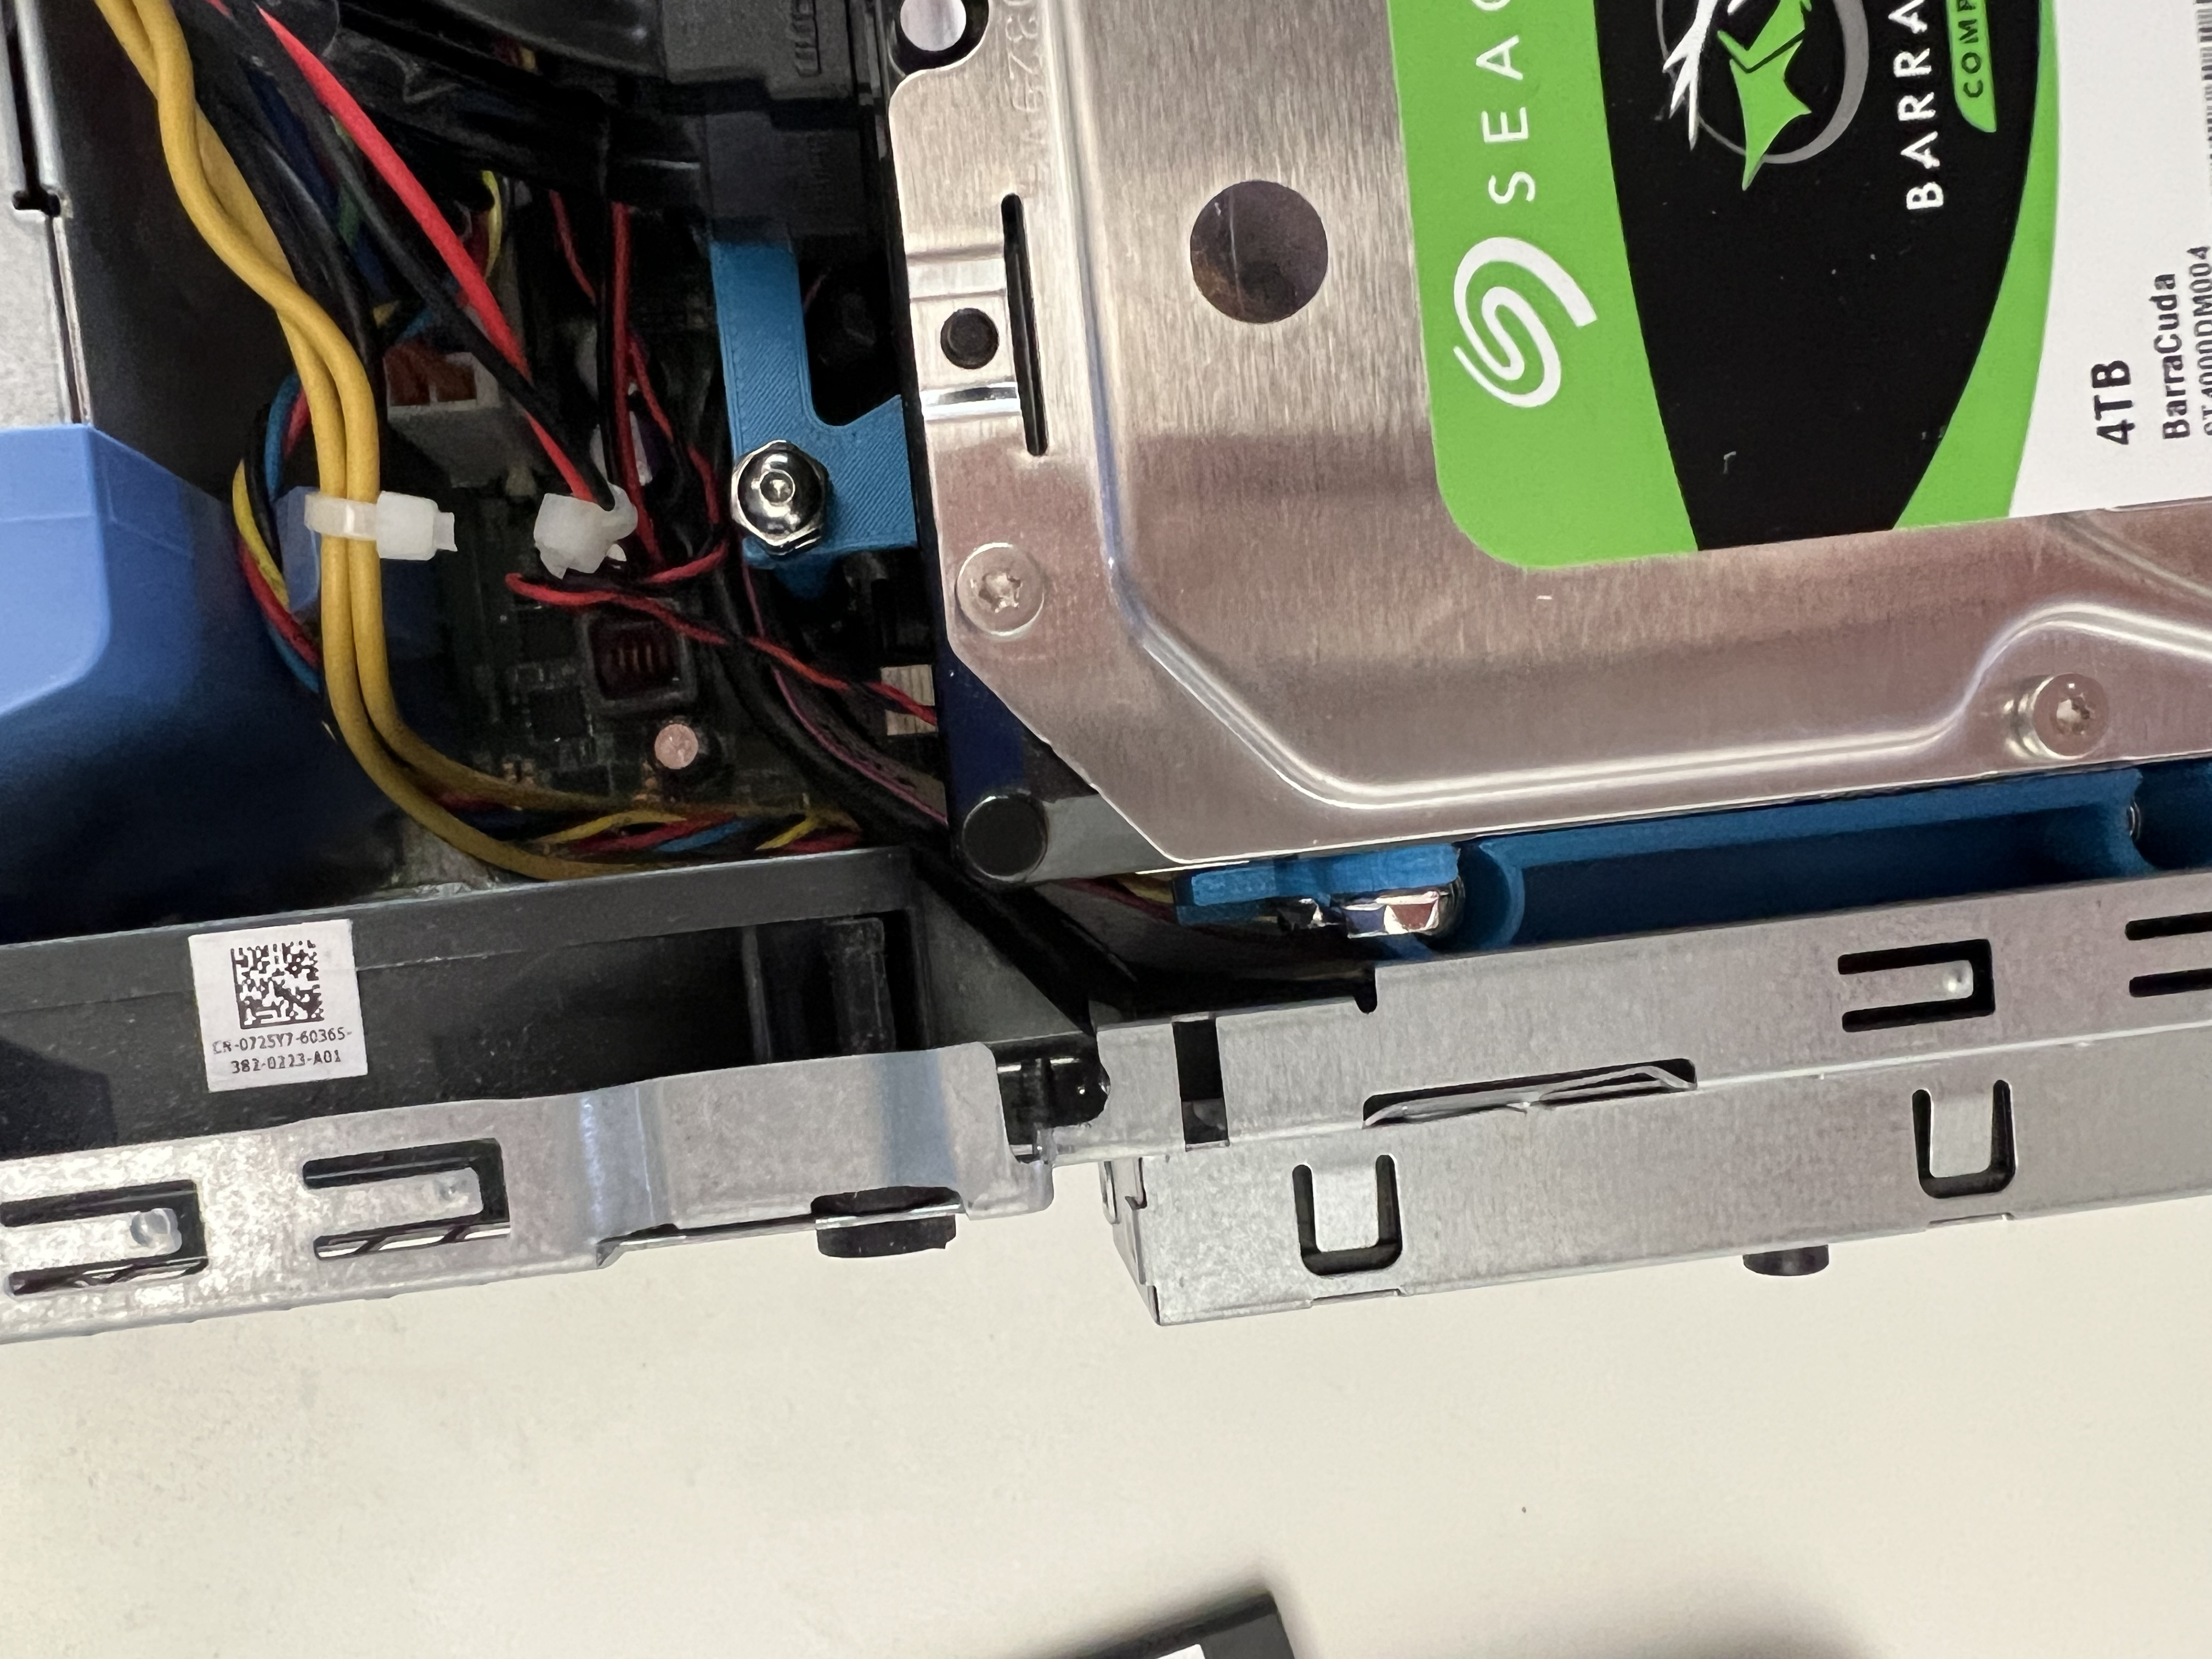 the mounted hard drives very close to the front of the case and the case fan